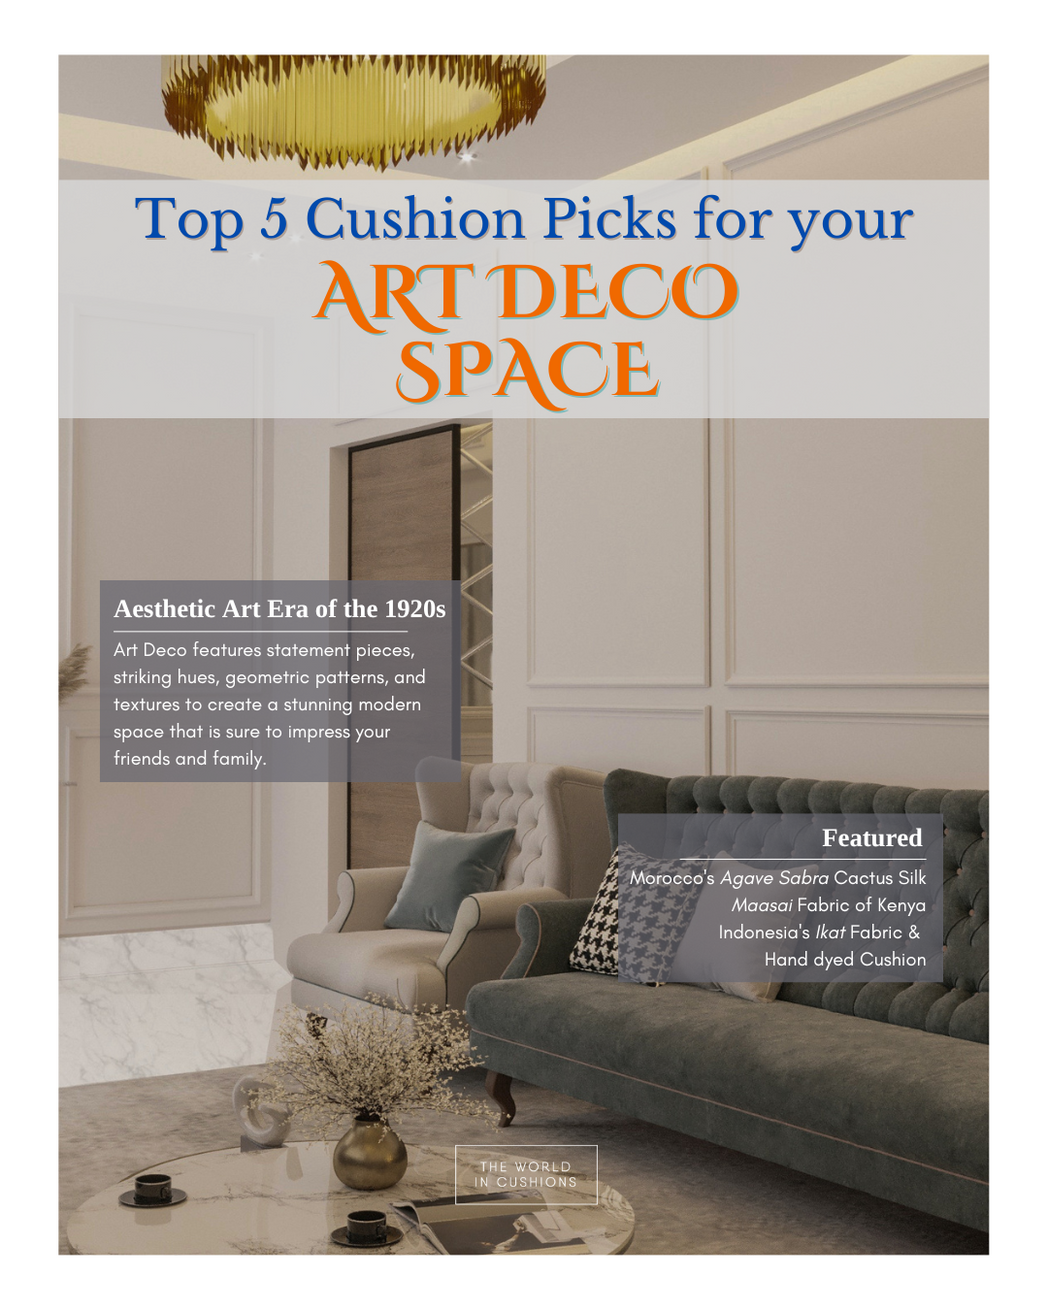 Top 5 Cushion Picks for your Art Deco Space